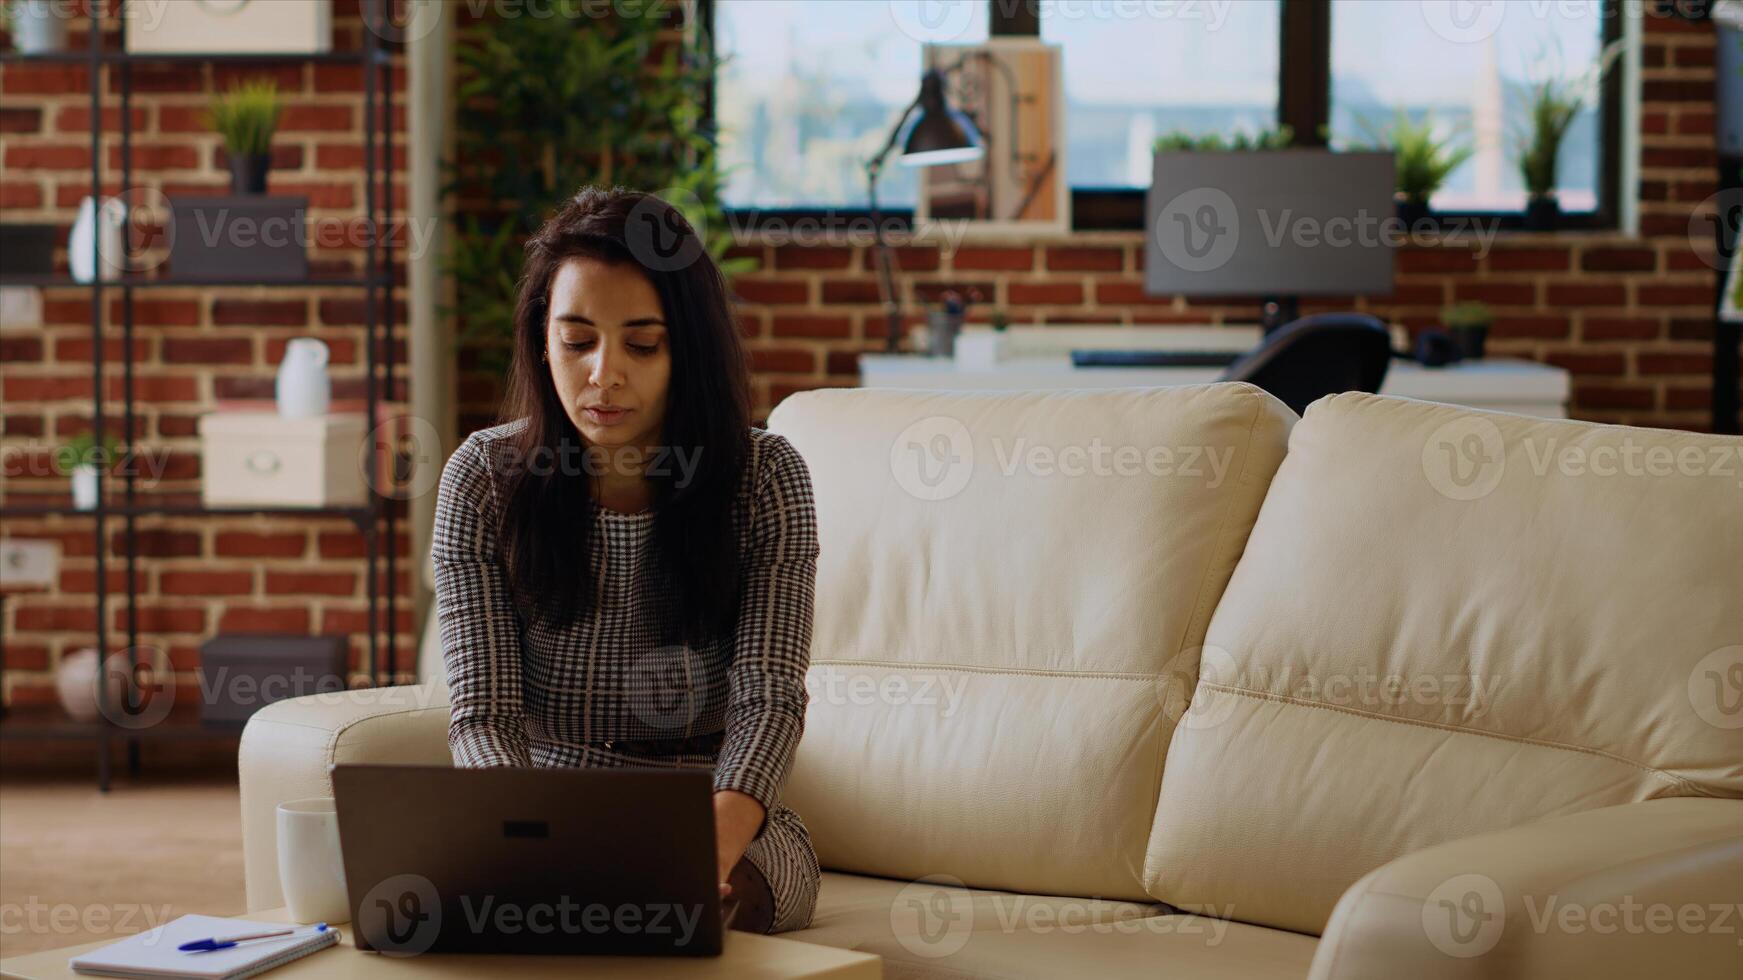 Indian teleworker sitting on couch, focused on finishing tasks in personal office. Remote worker concentrating on correctly inputting data on laptop, hurrying to complete project before deadline photo